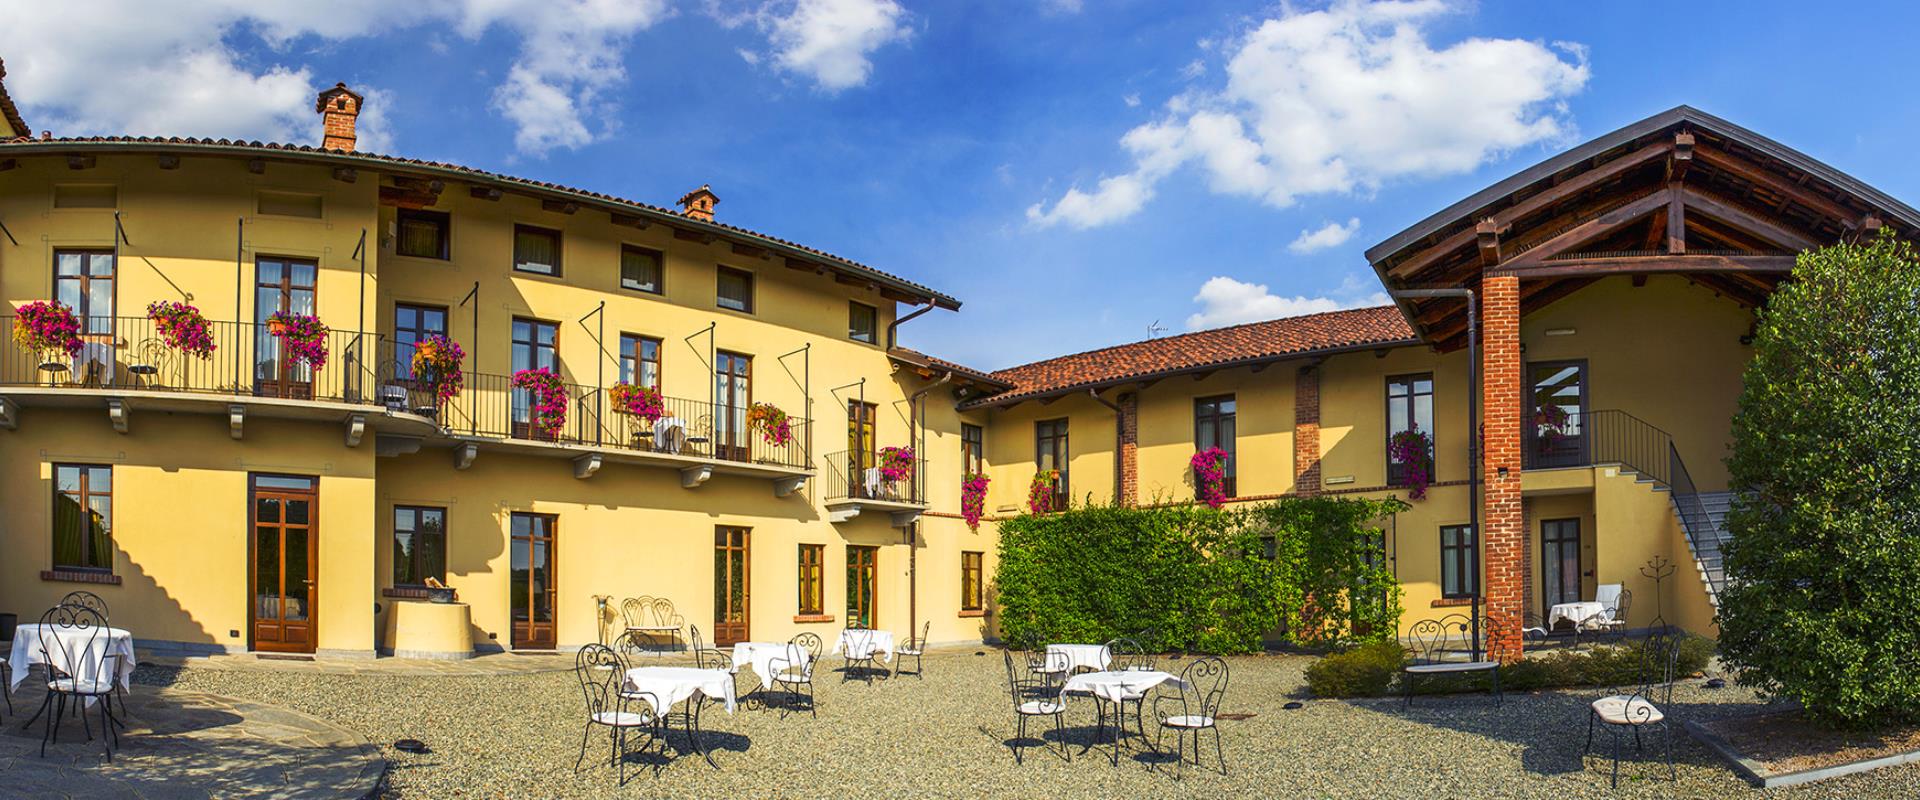 The Best Western Plus Hotel Le Rondini offers you the ideal solution for your stay. A few minutes from Caselle airport and a short distance from the center of Turin and the Allianz Stadium Juventus.